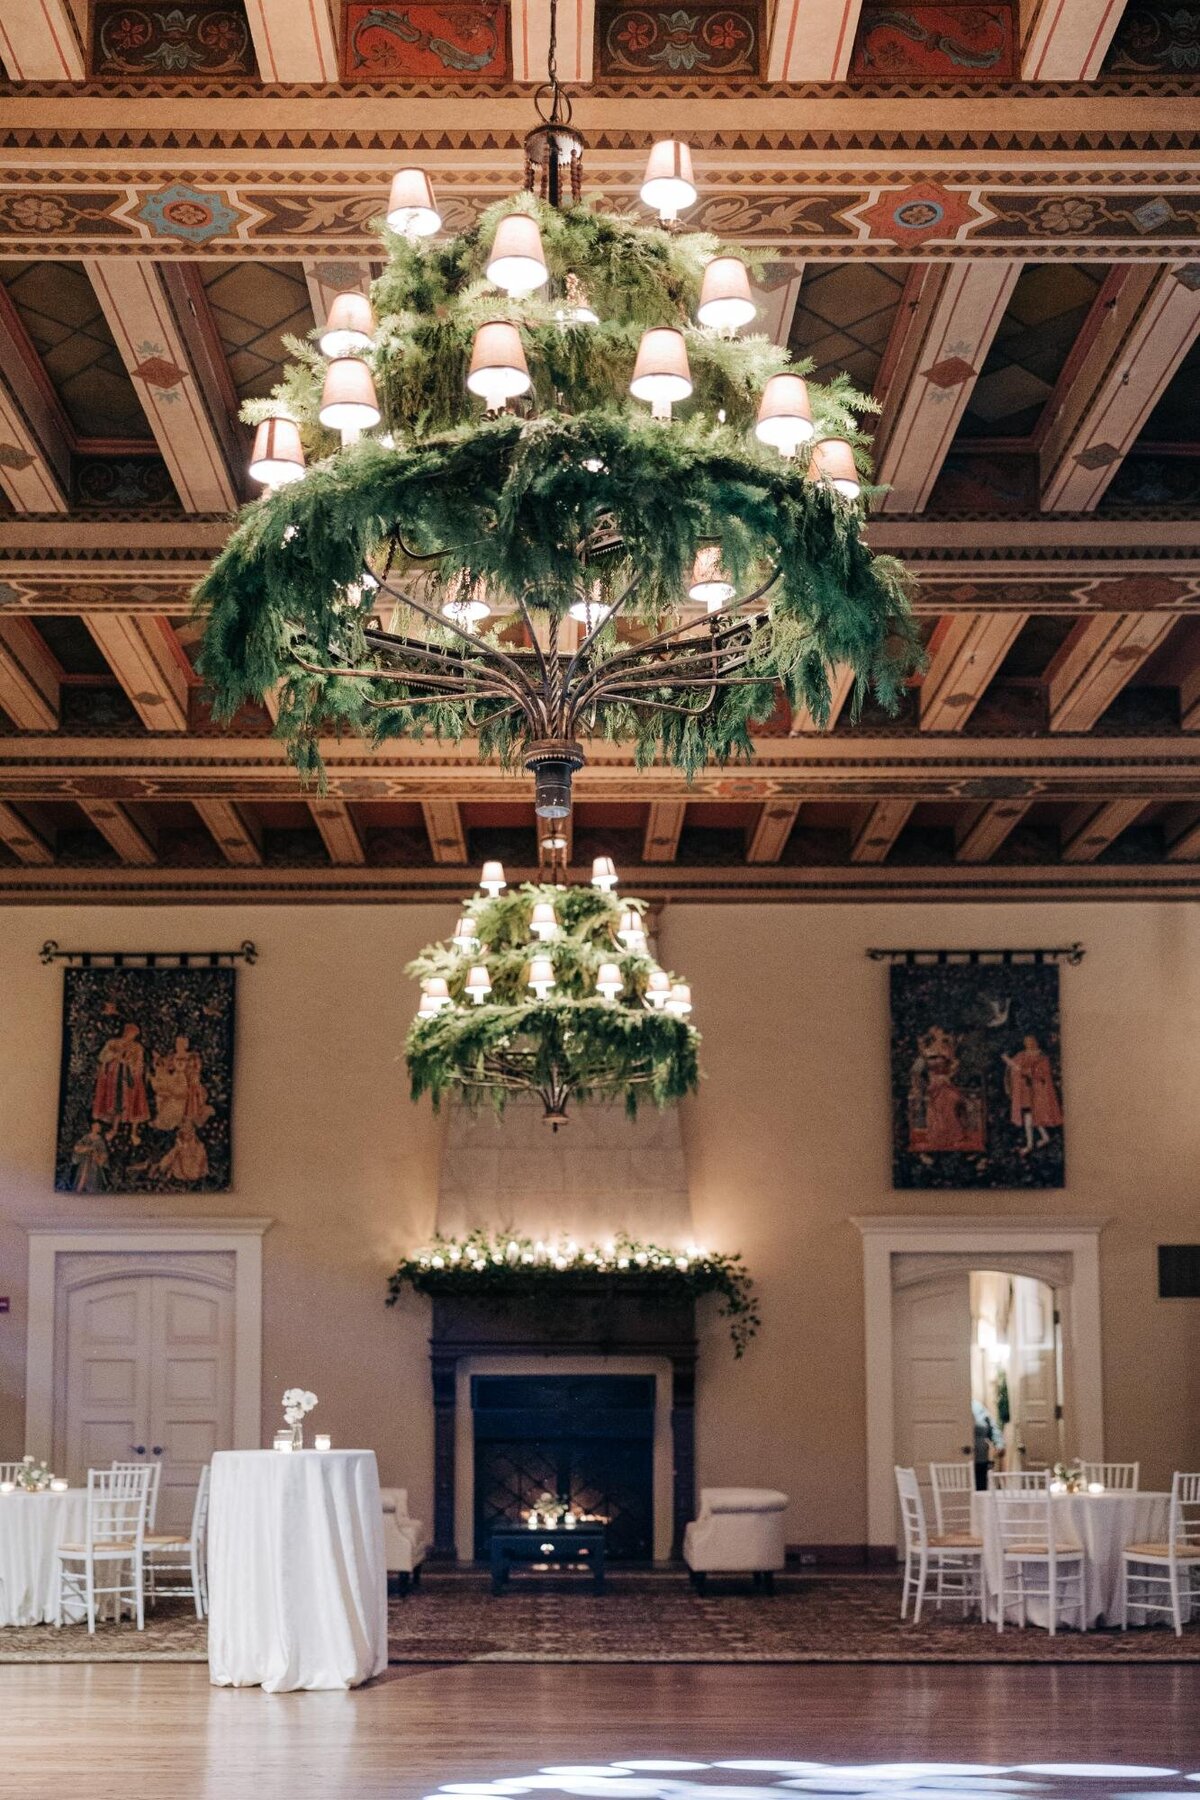 An elegant chandelier adorned with greenery hangs in a grand hall with a fireplace and tapestries.